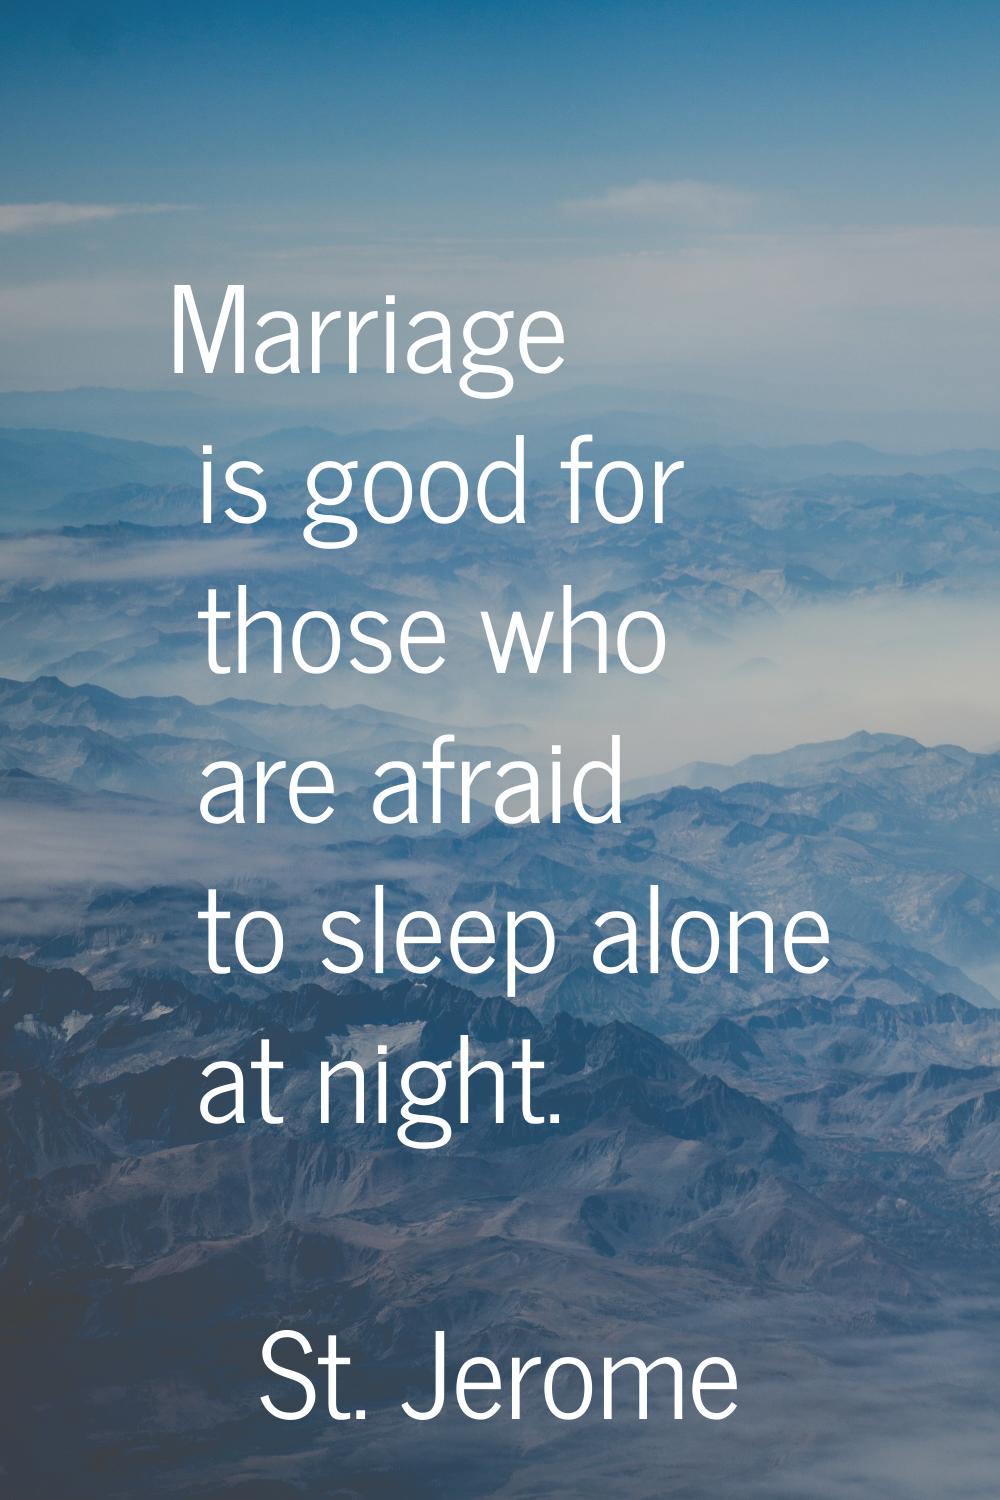 Marriage is good for those who are afraid to sleep alone at night.